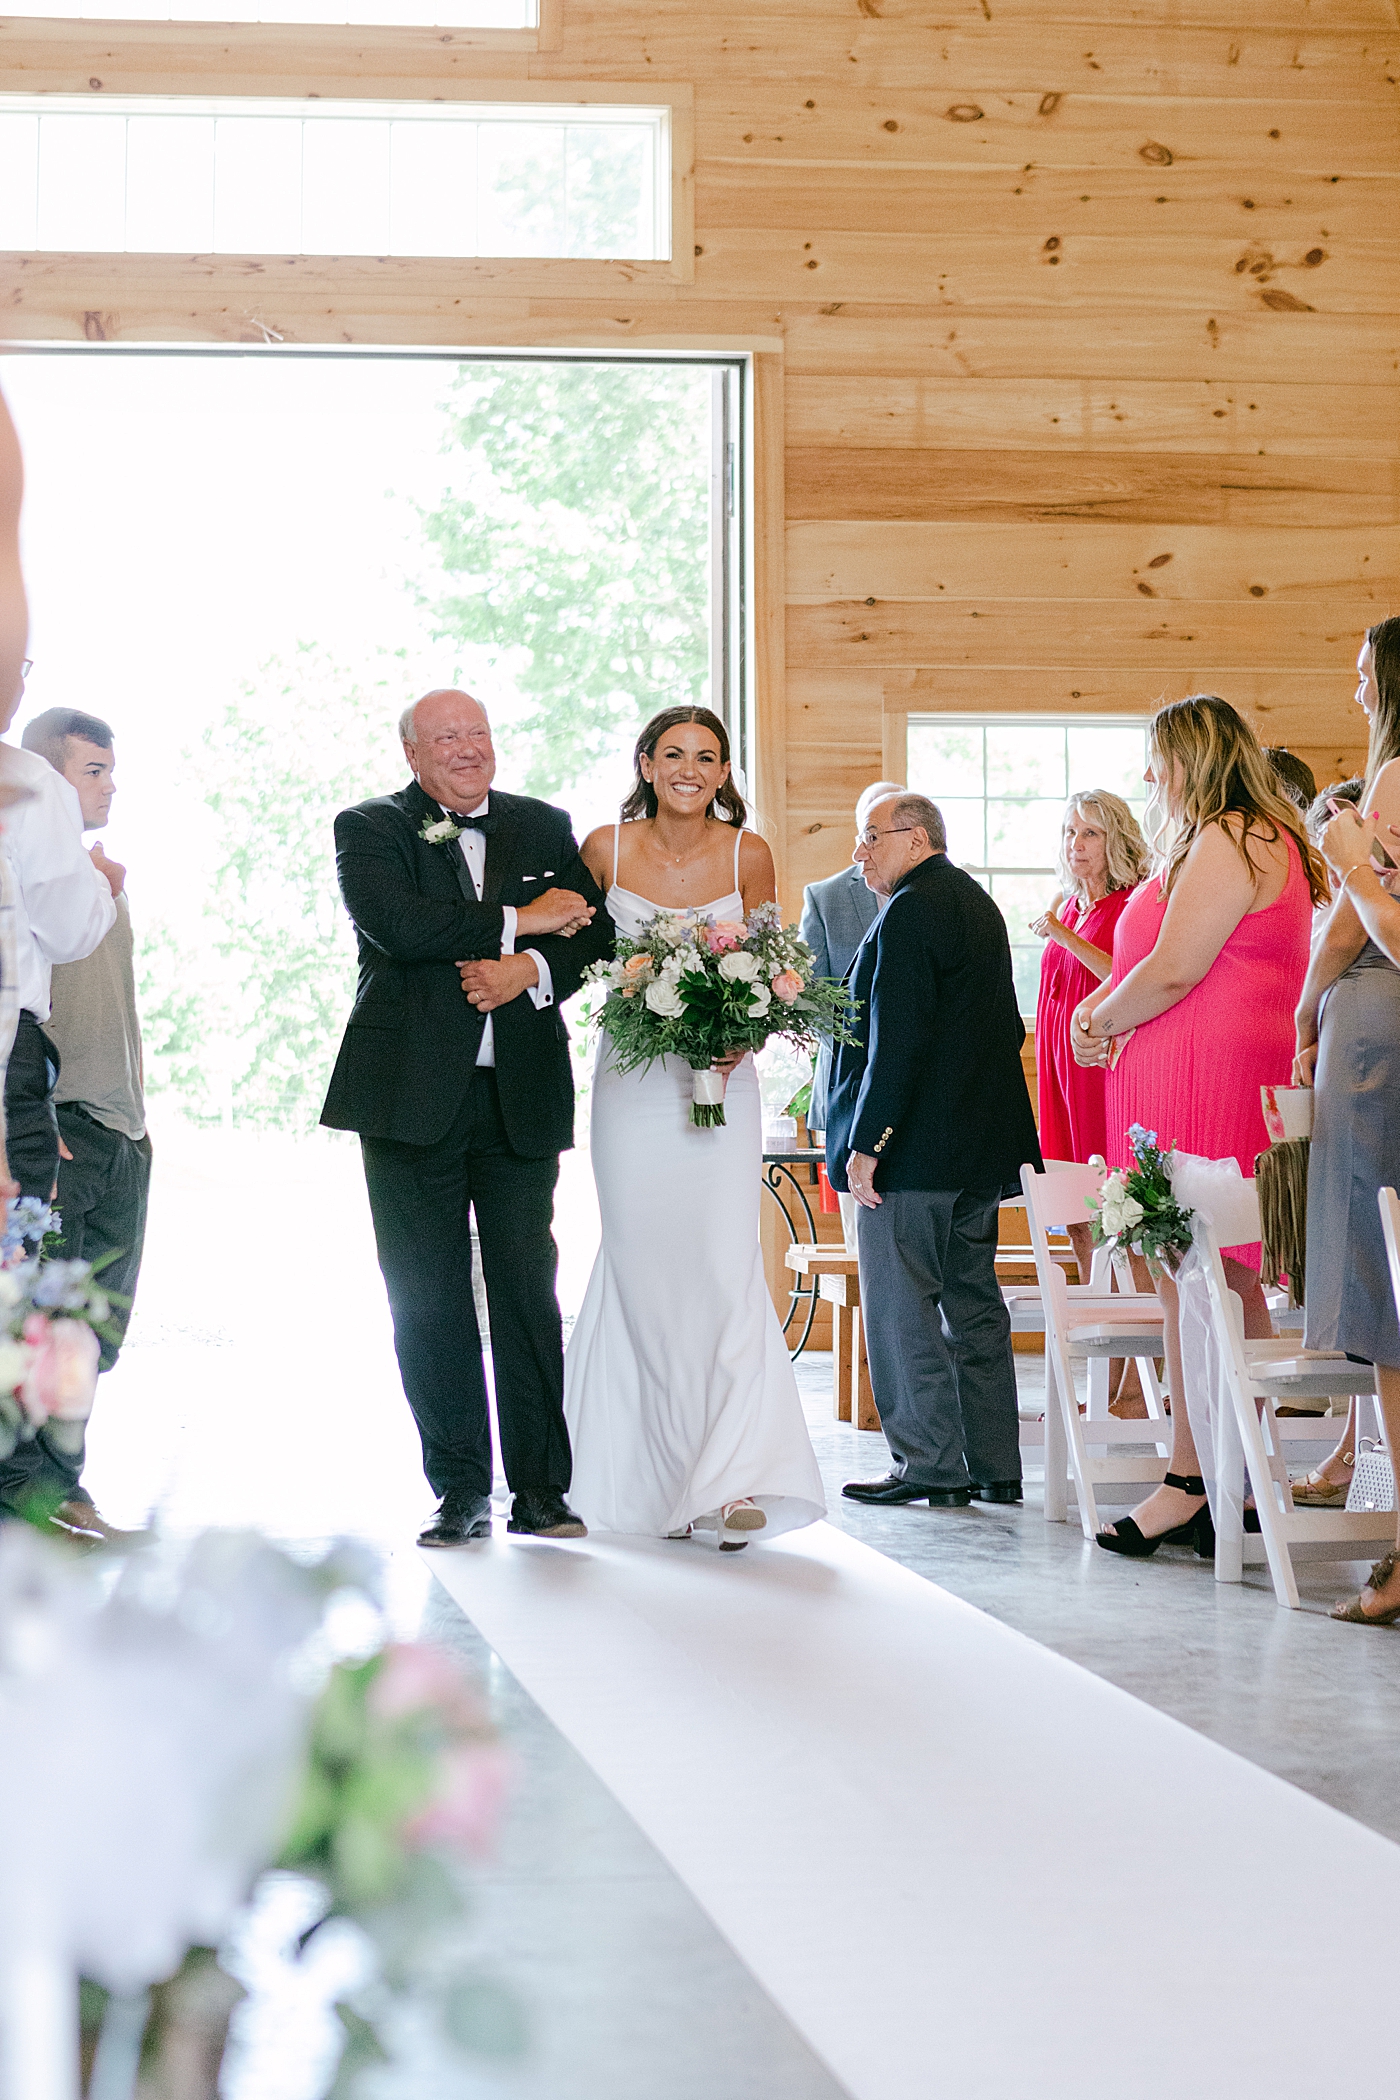 Bride walking down the aisle with her dad | Image by Hope Helmuth Photography